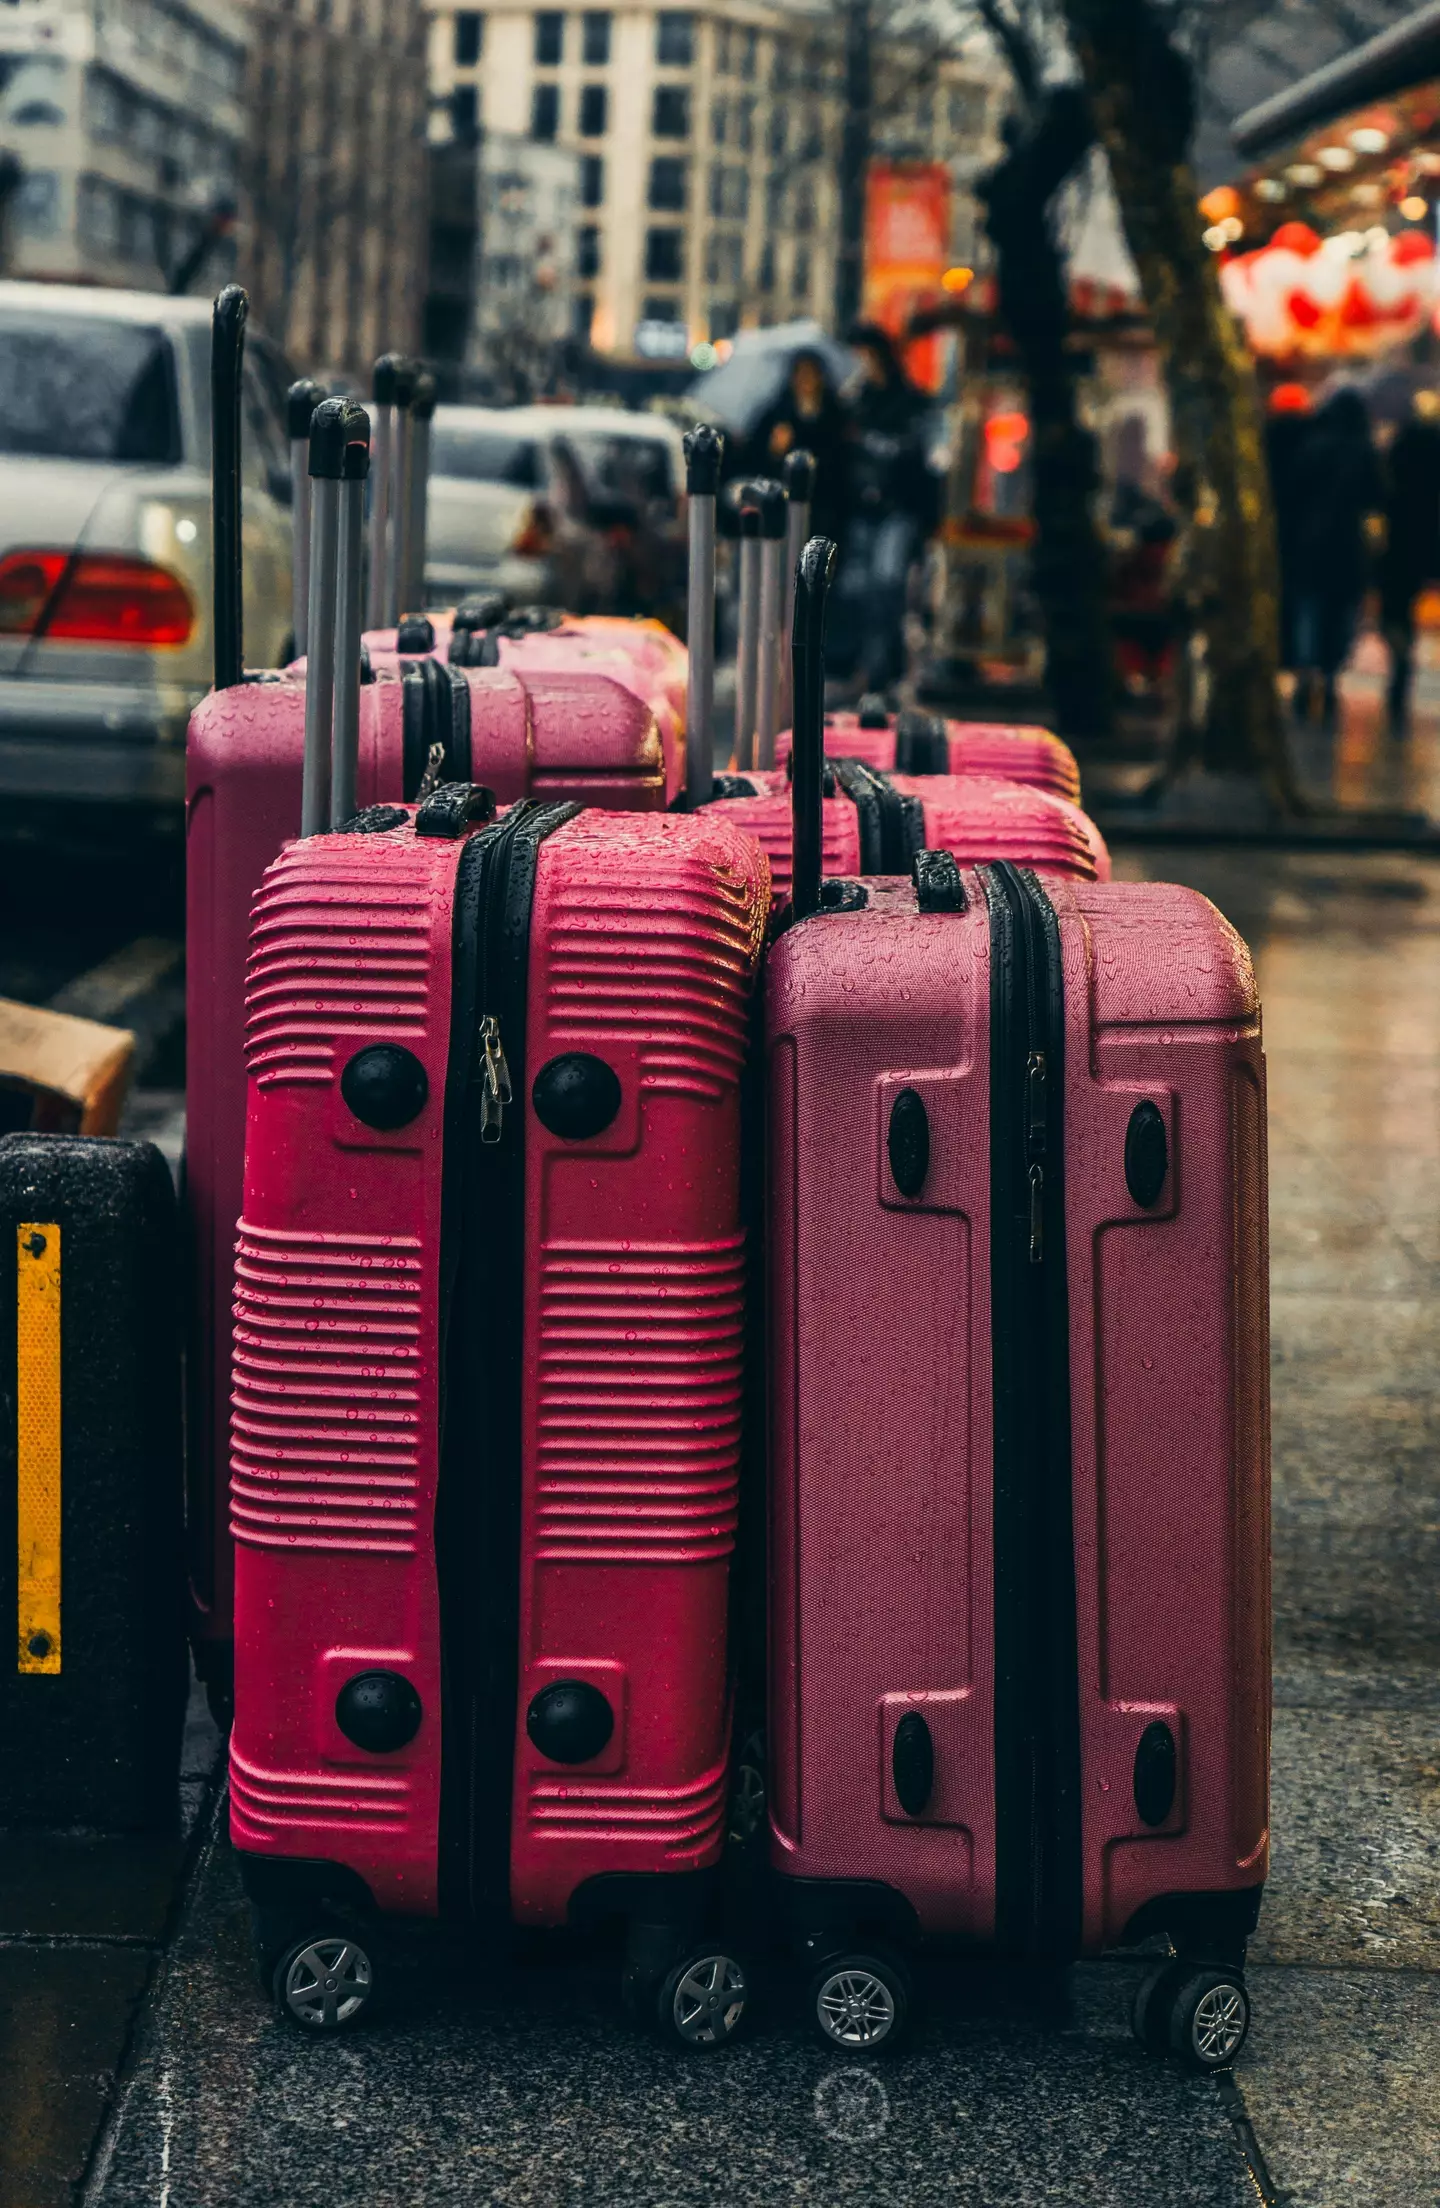 Your suitcase can also be helpful for stopping any unwanted visitors from entering your room. (Pexels)